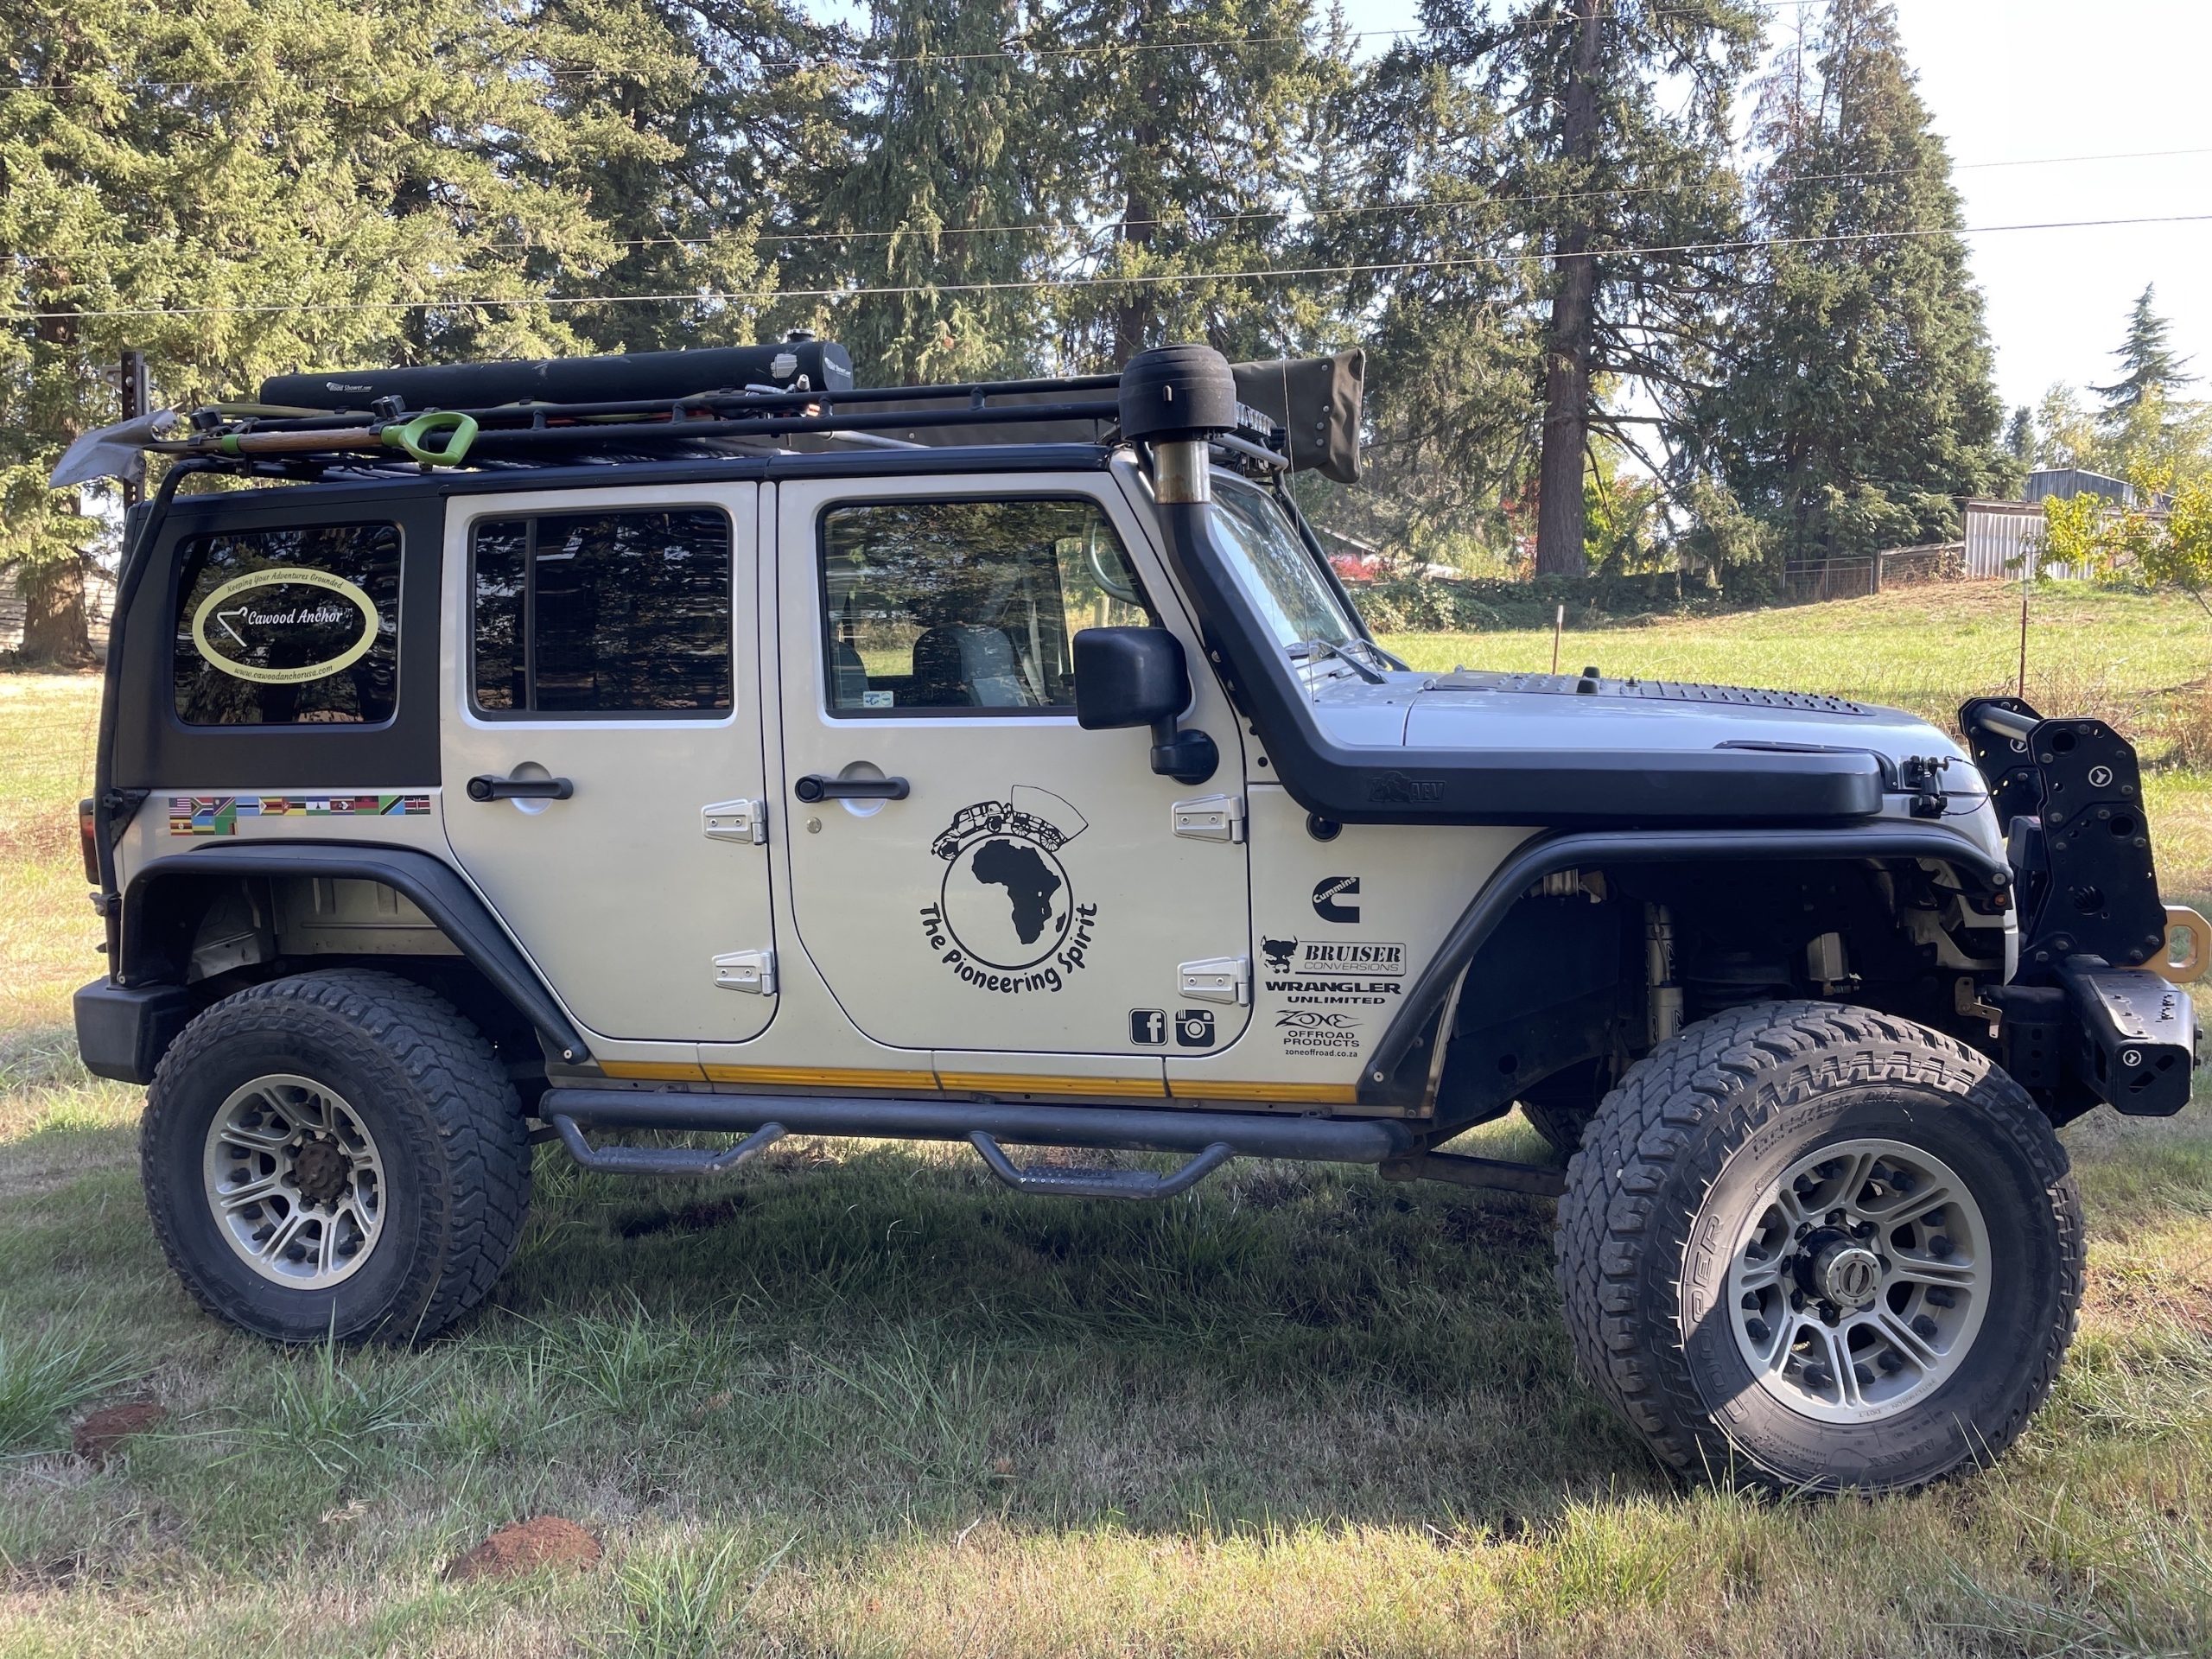 Overland Classifieds :: 2007 Jeep Wrangler Unlimited with Cummins 4BT -  Expedition Portal